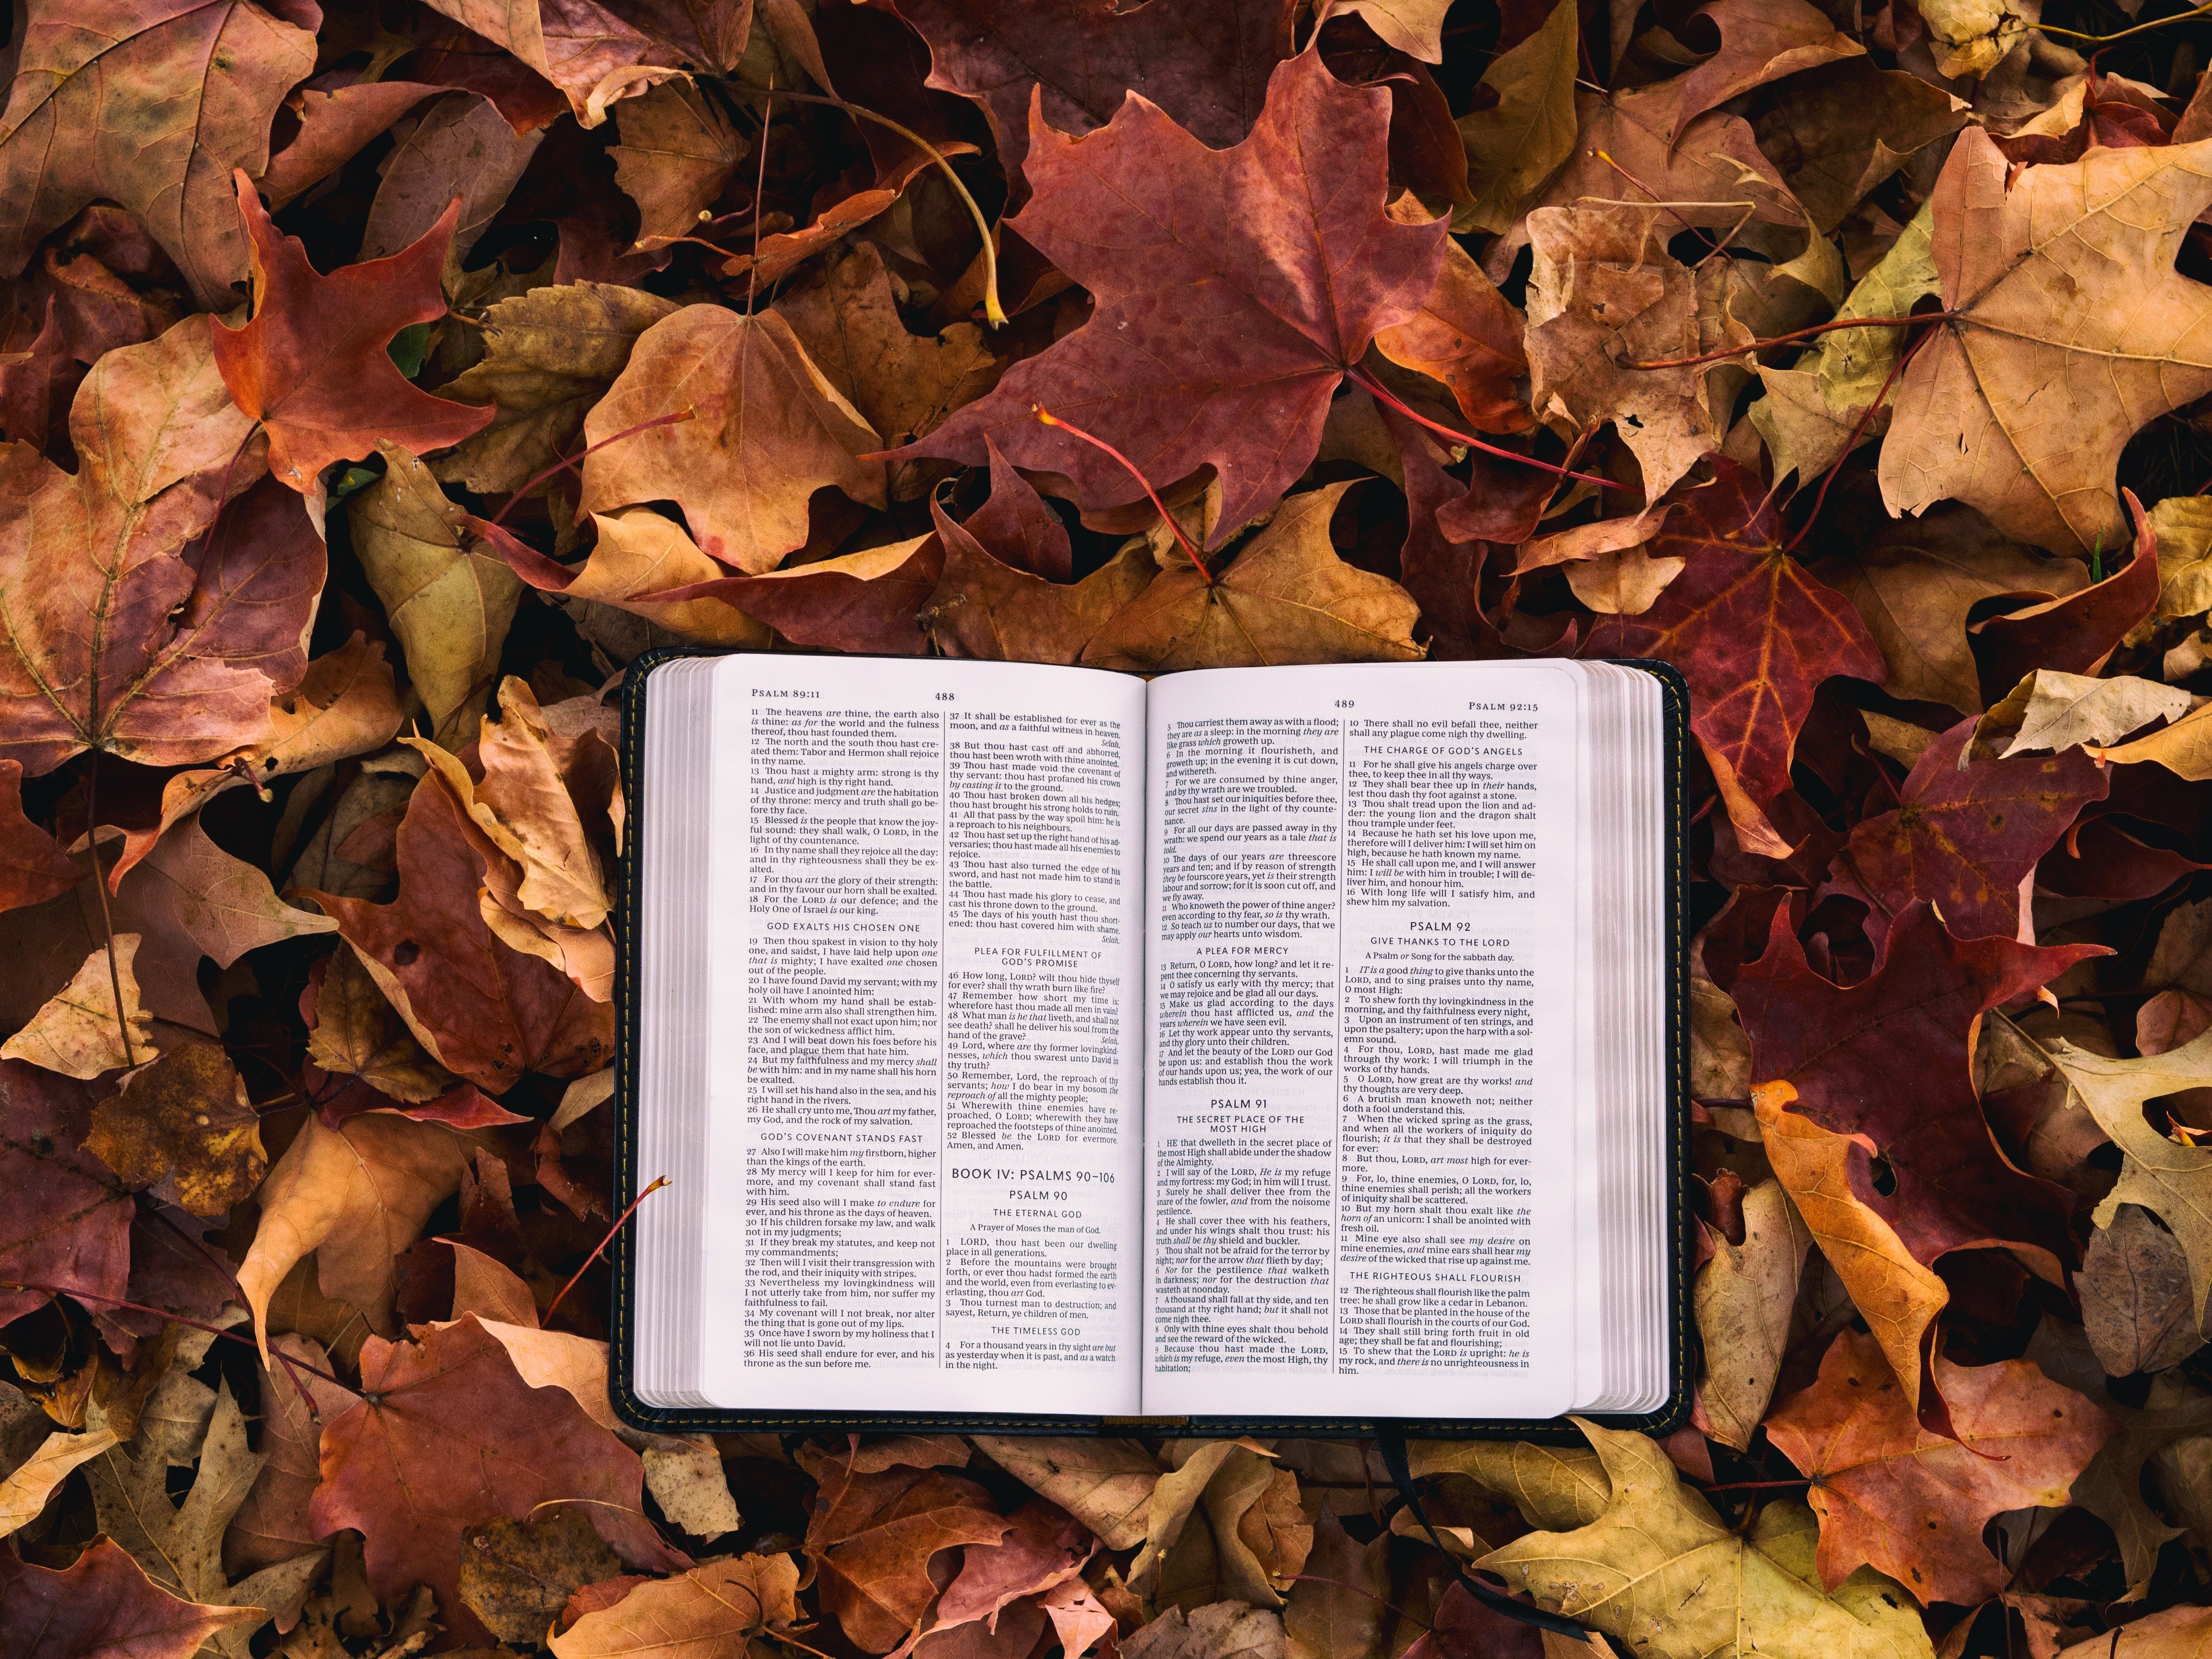 4608x3456 #pages, #leaf, #bible, #Creative Commons image, #fall, # autumn, #words, #leaves, #read, #red, #book, #leafe, #brown, #text. Mocah.org HD Wallpaper